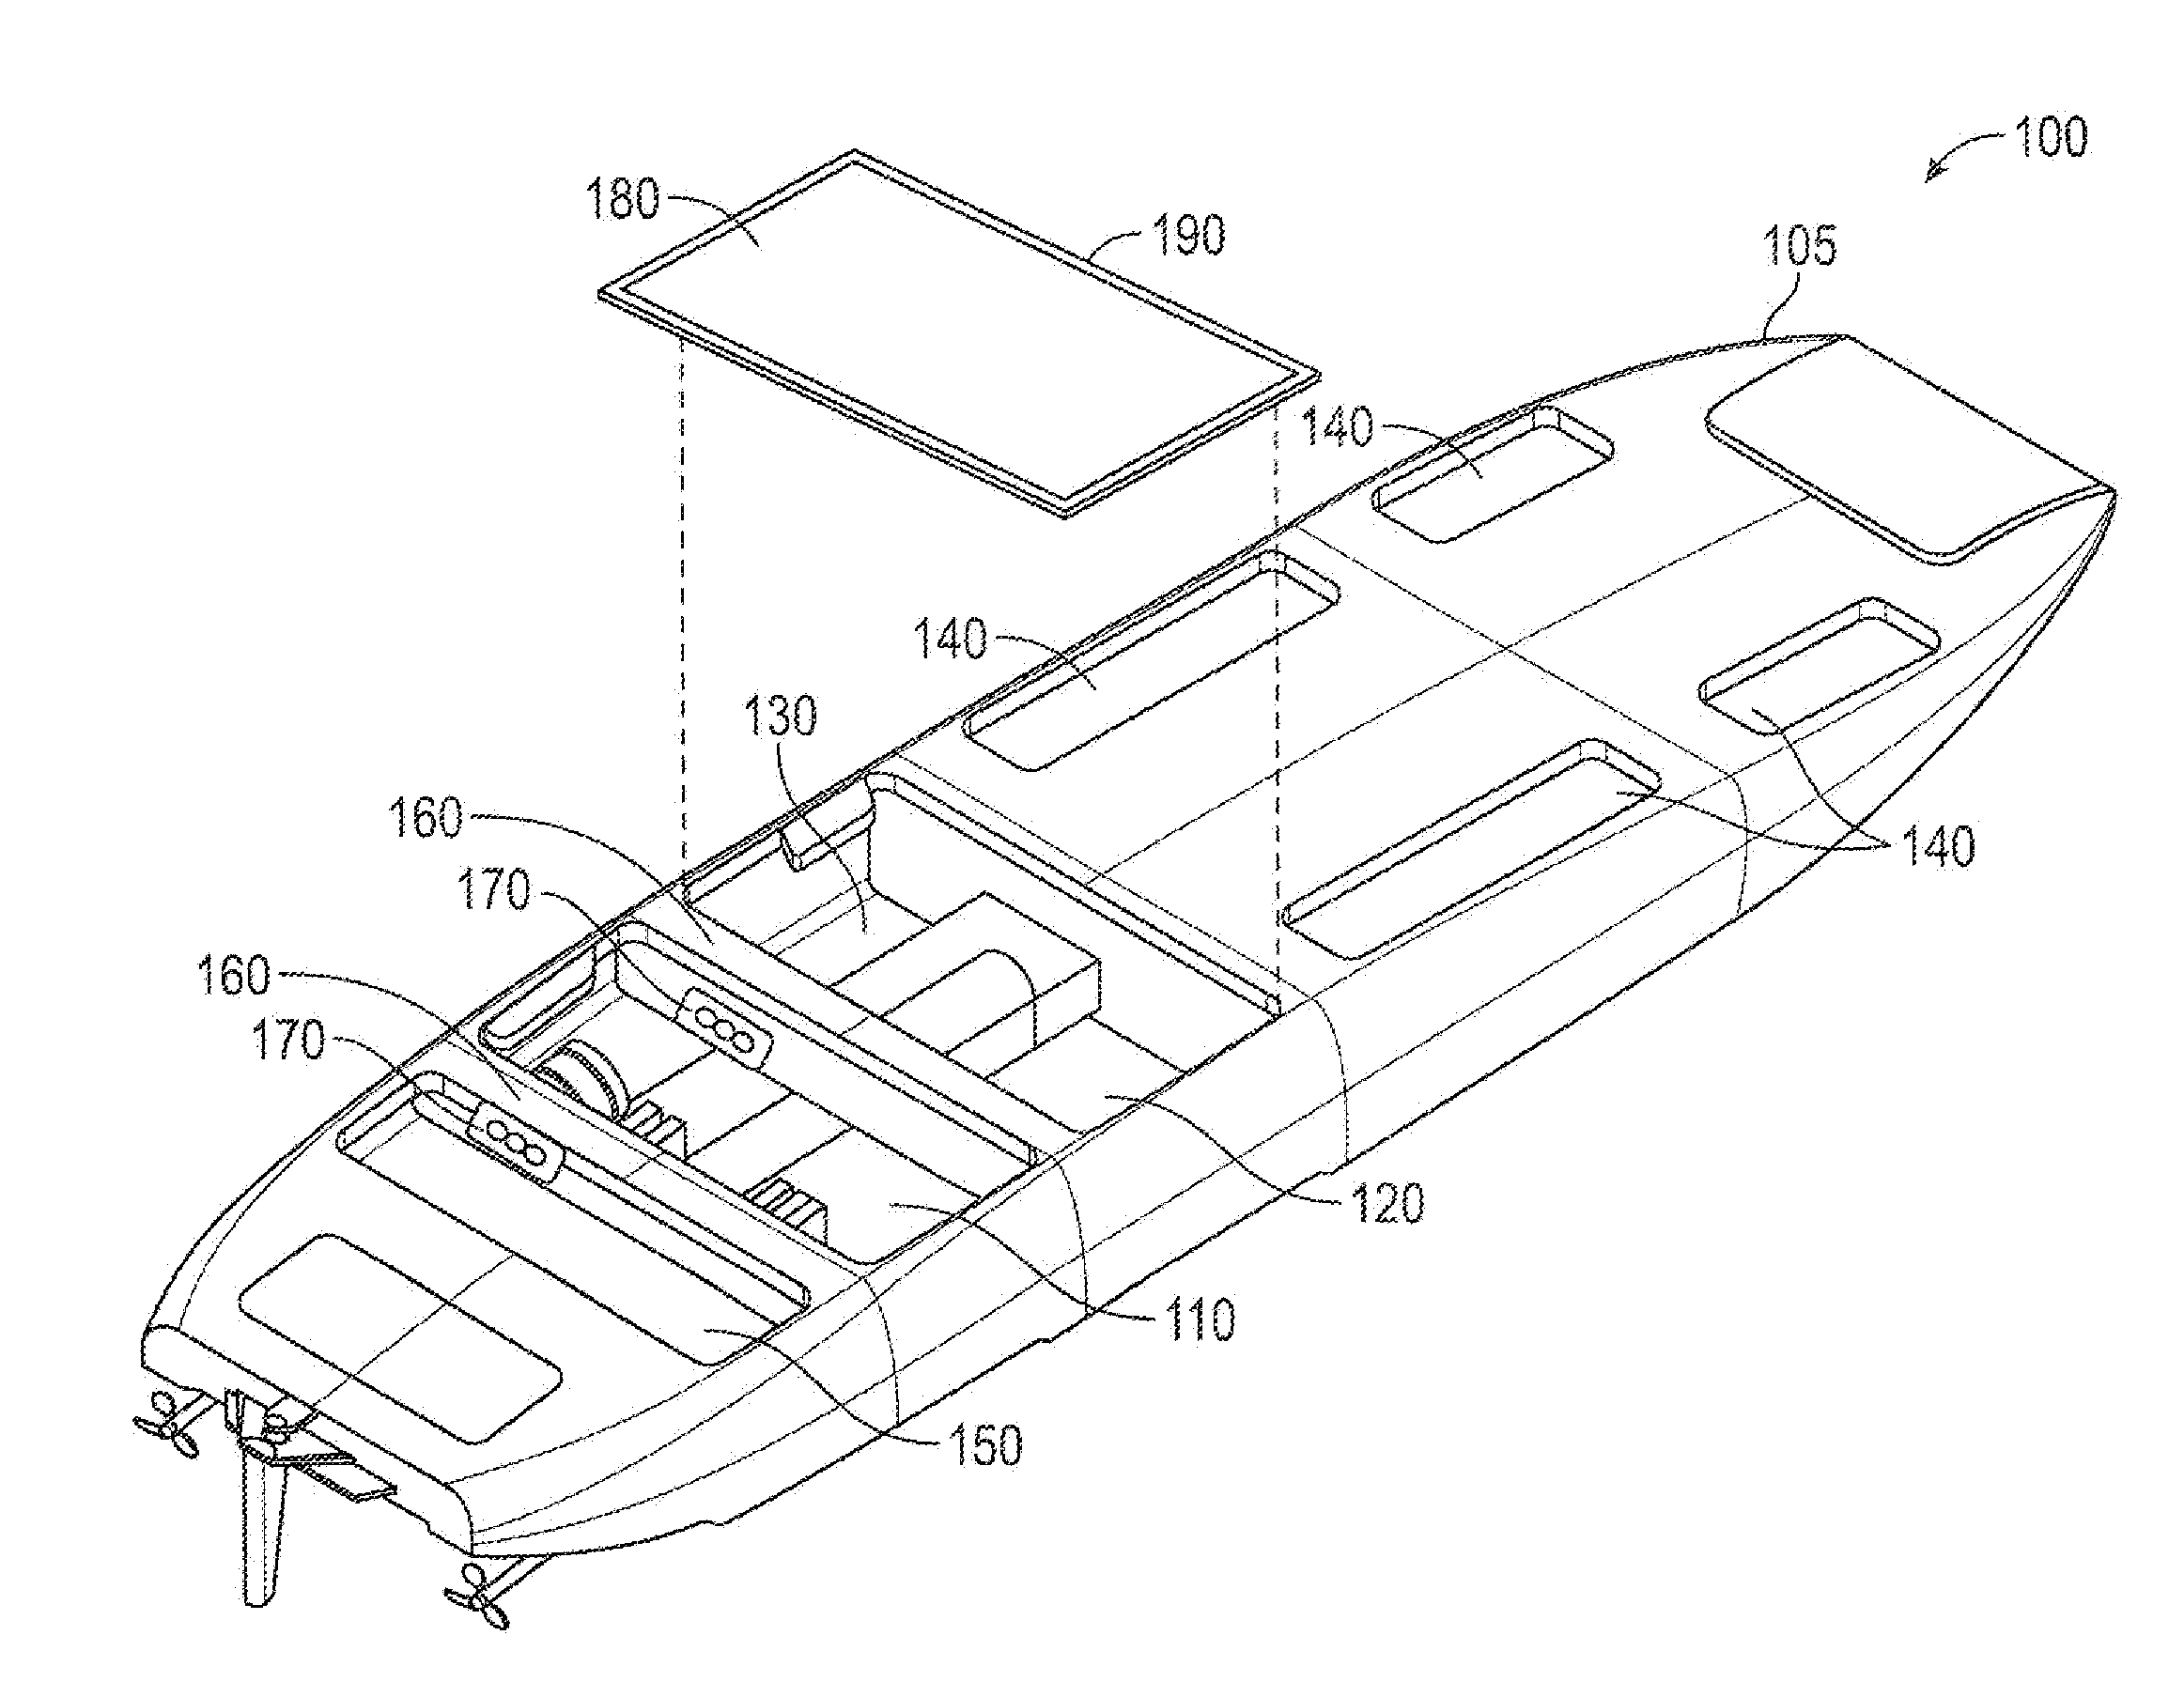 Systems and methods for multi-mode unmanned vehicle mission planning and control